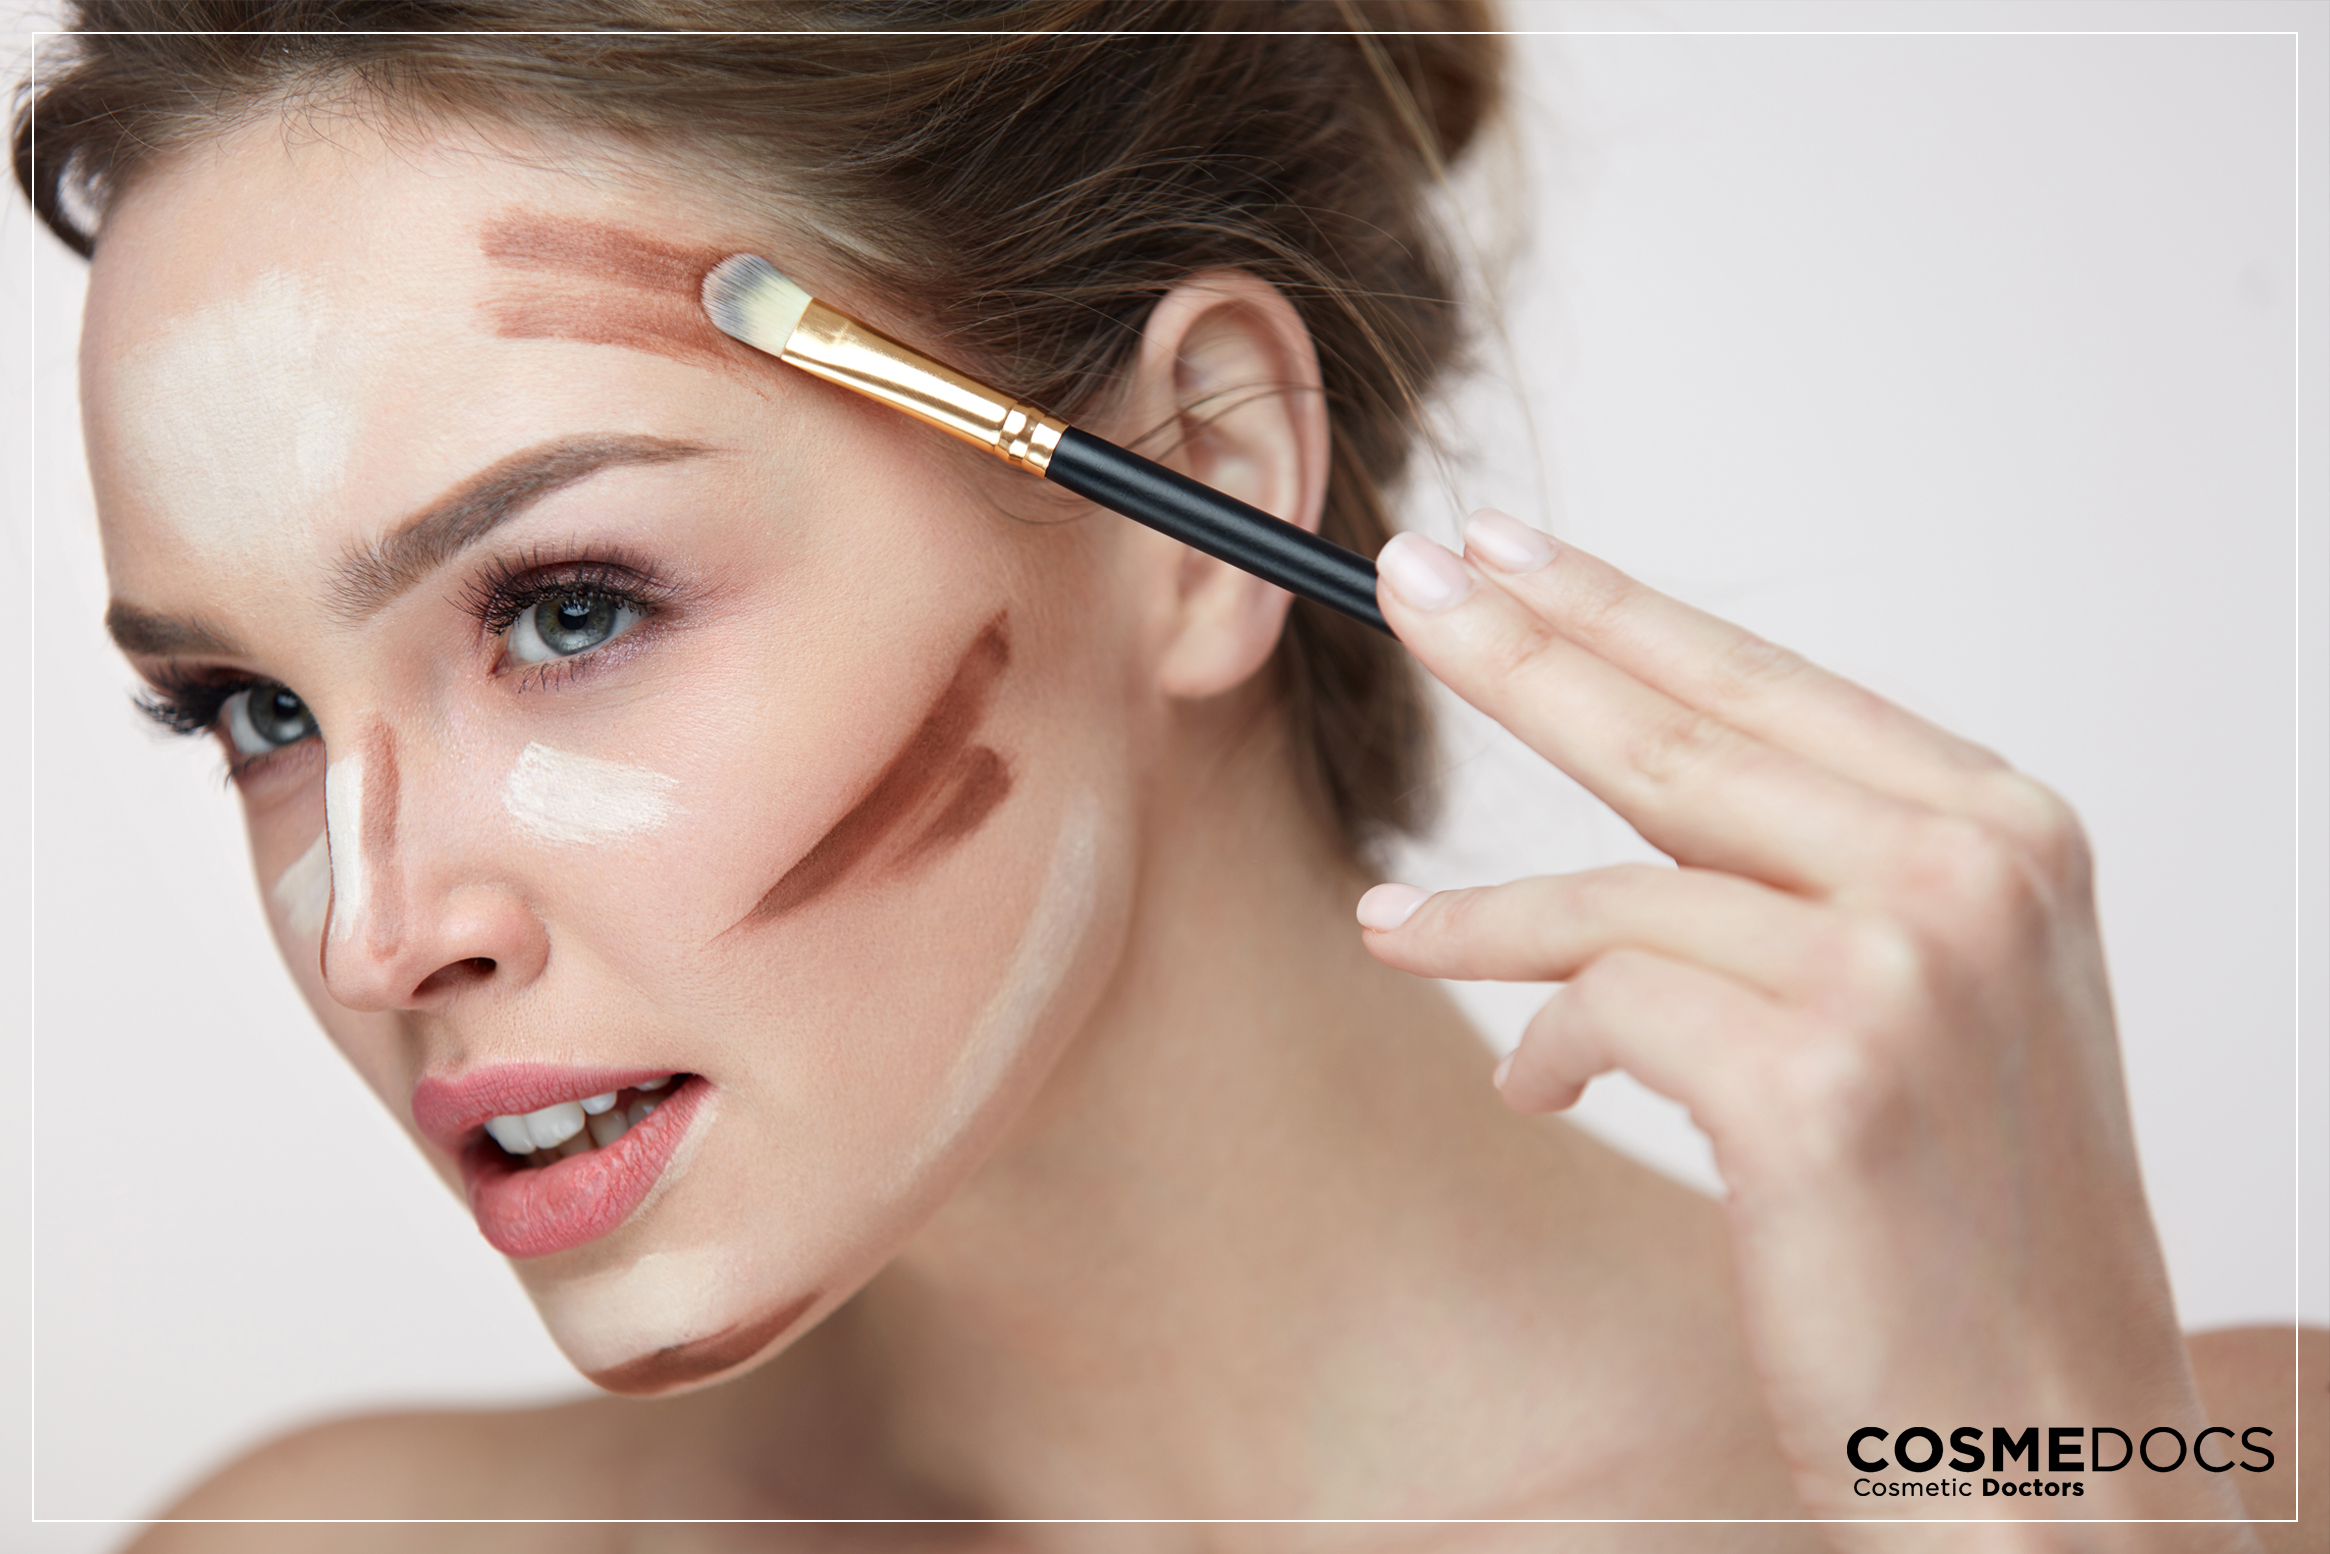 Heavy contouring and strobing